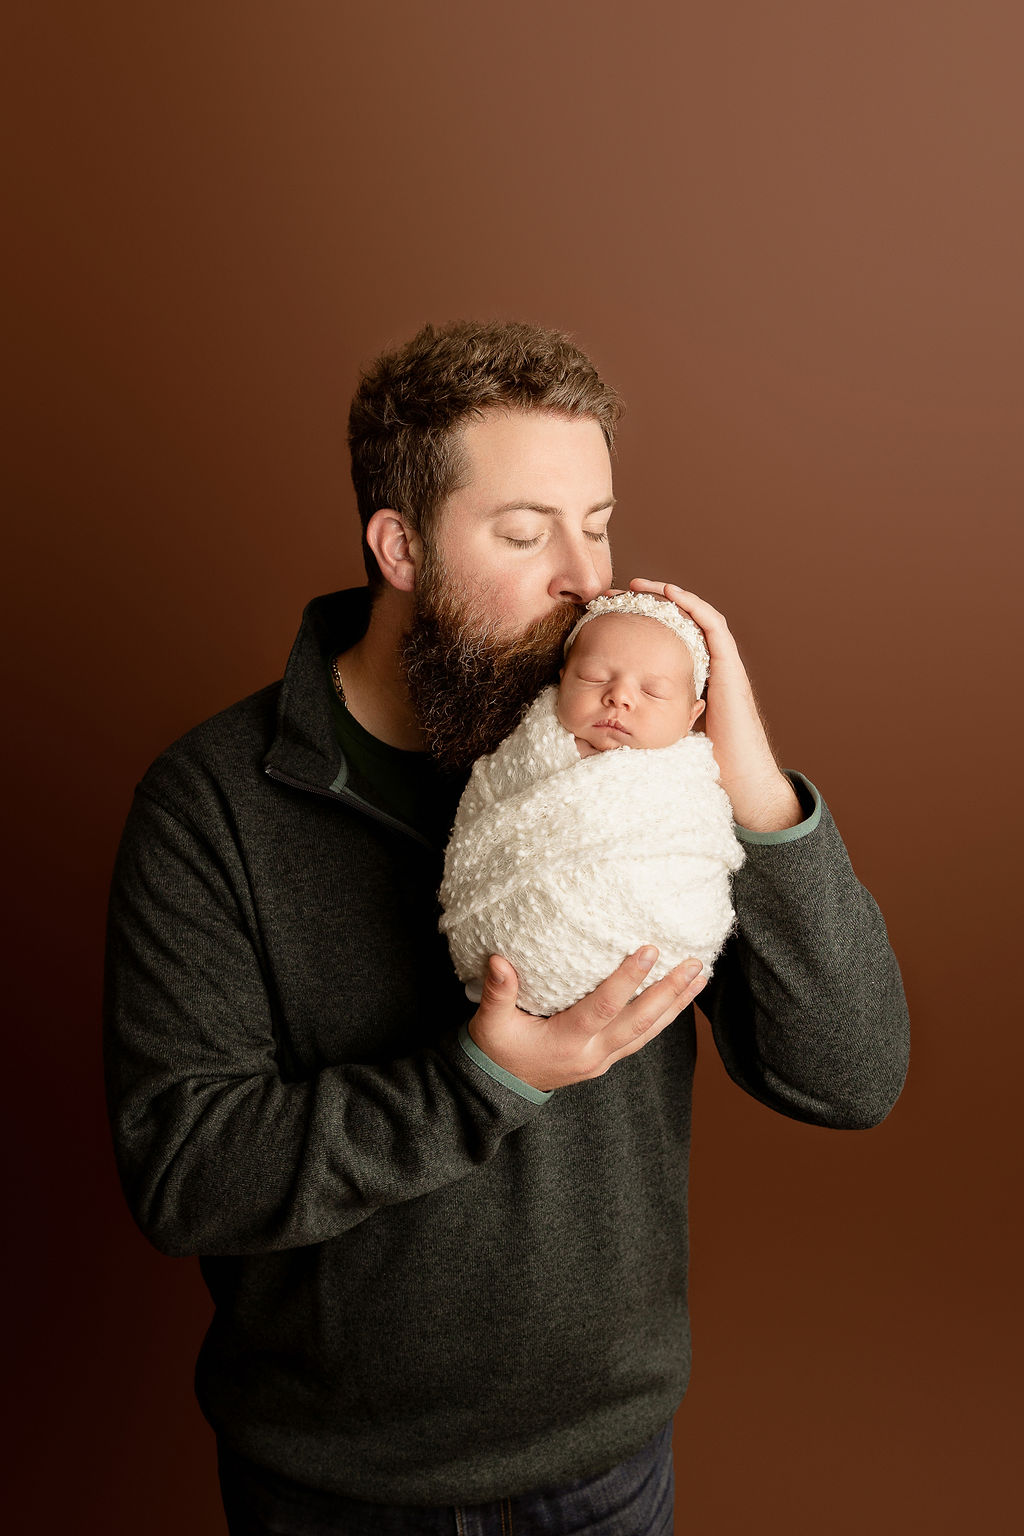 A father kisses his sleeping newborn baby while standing in a studio